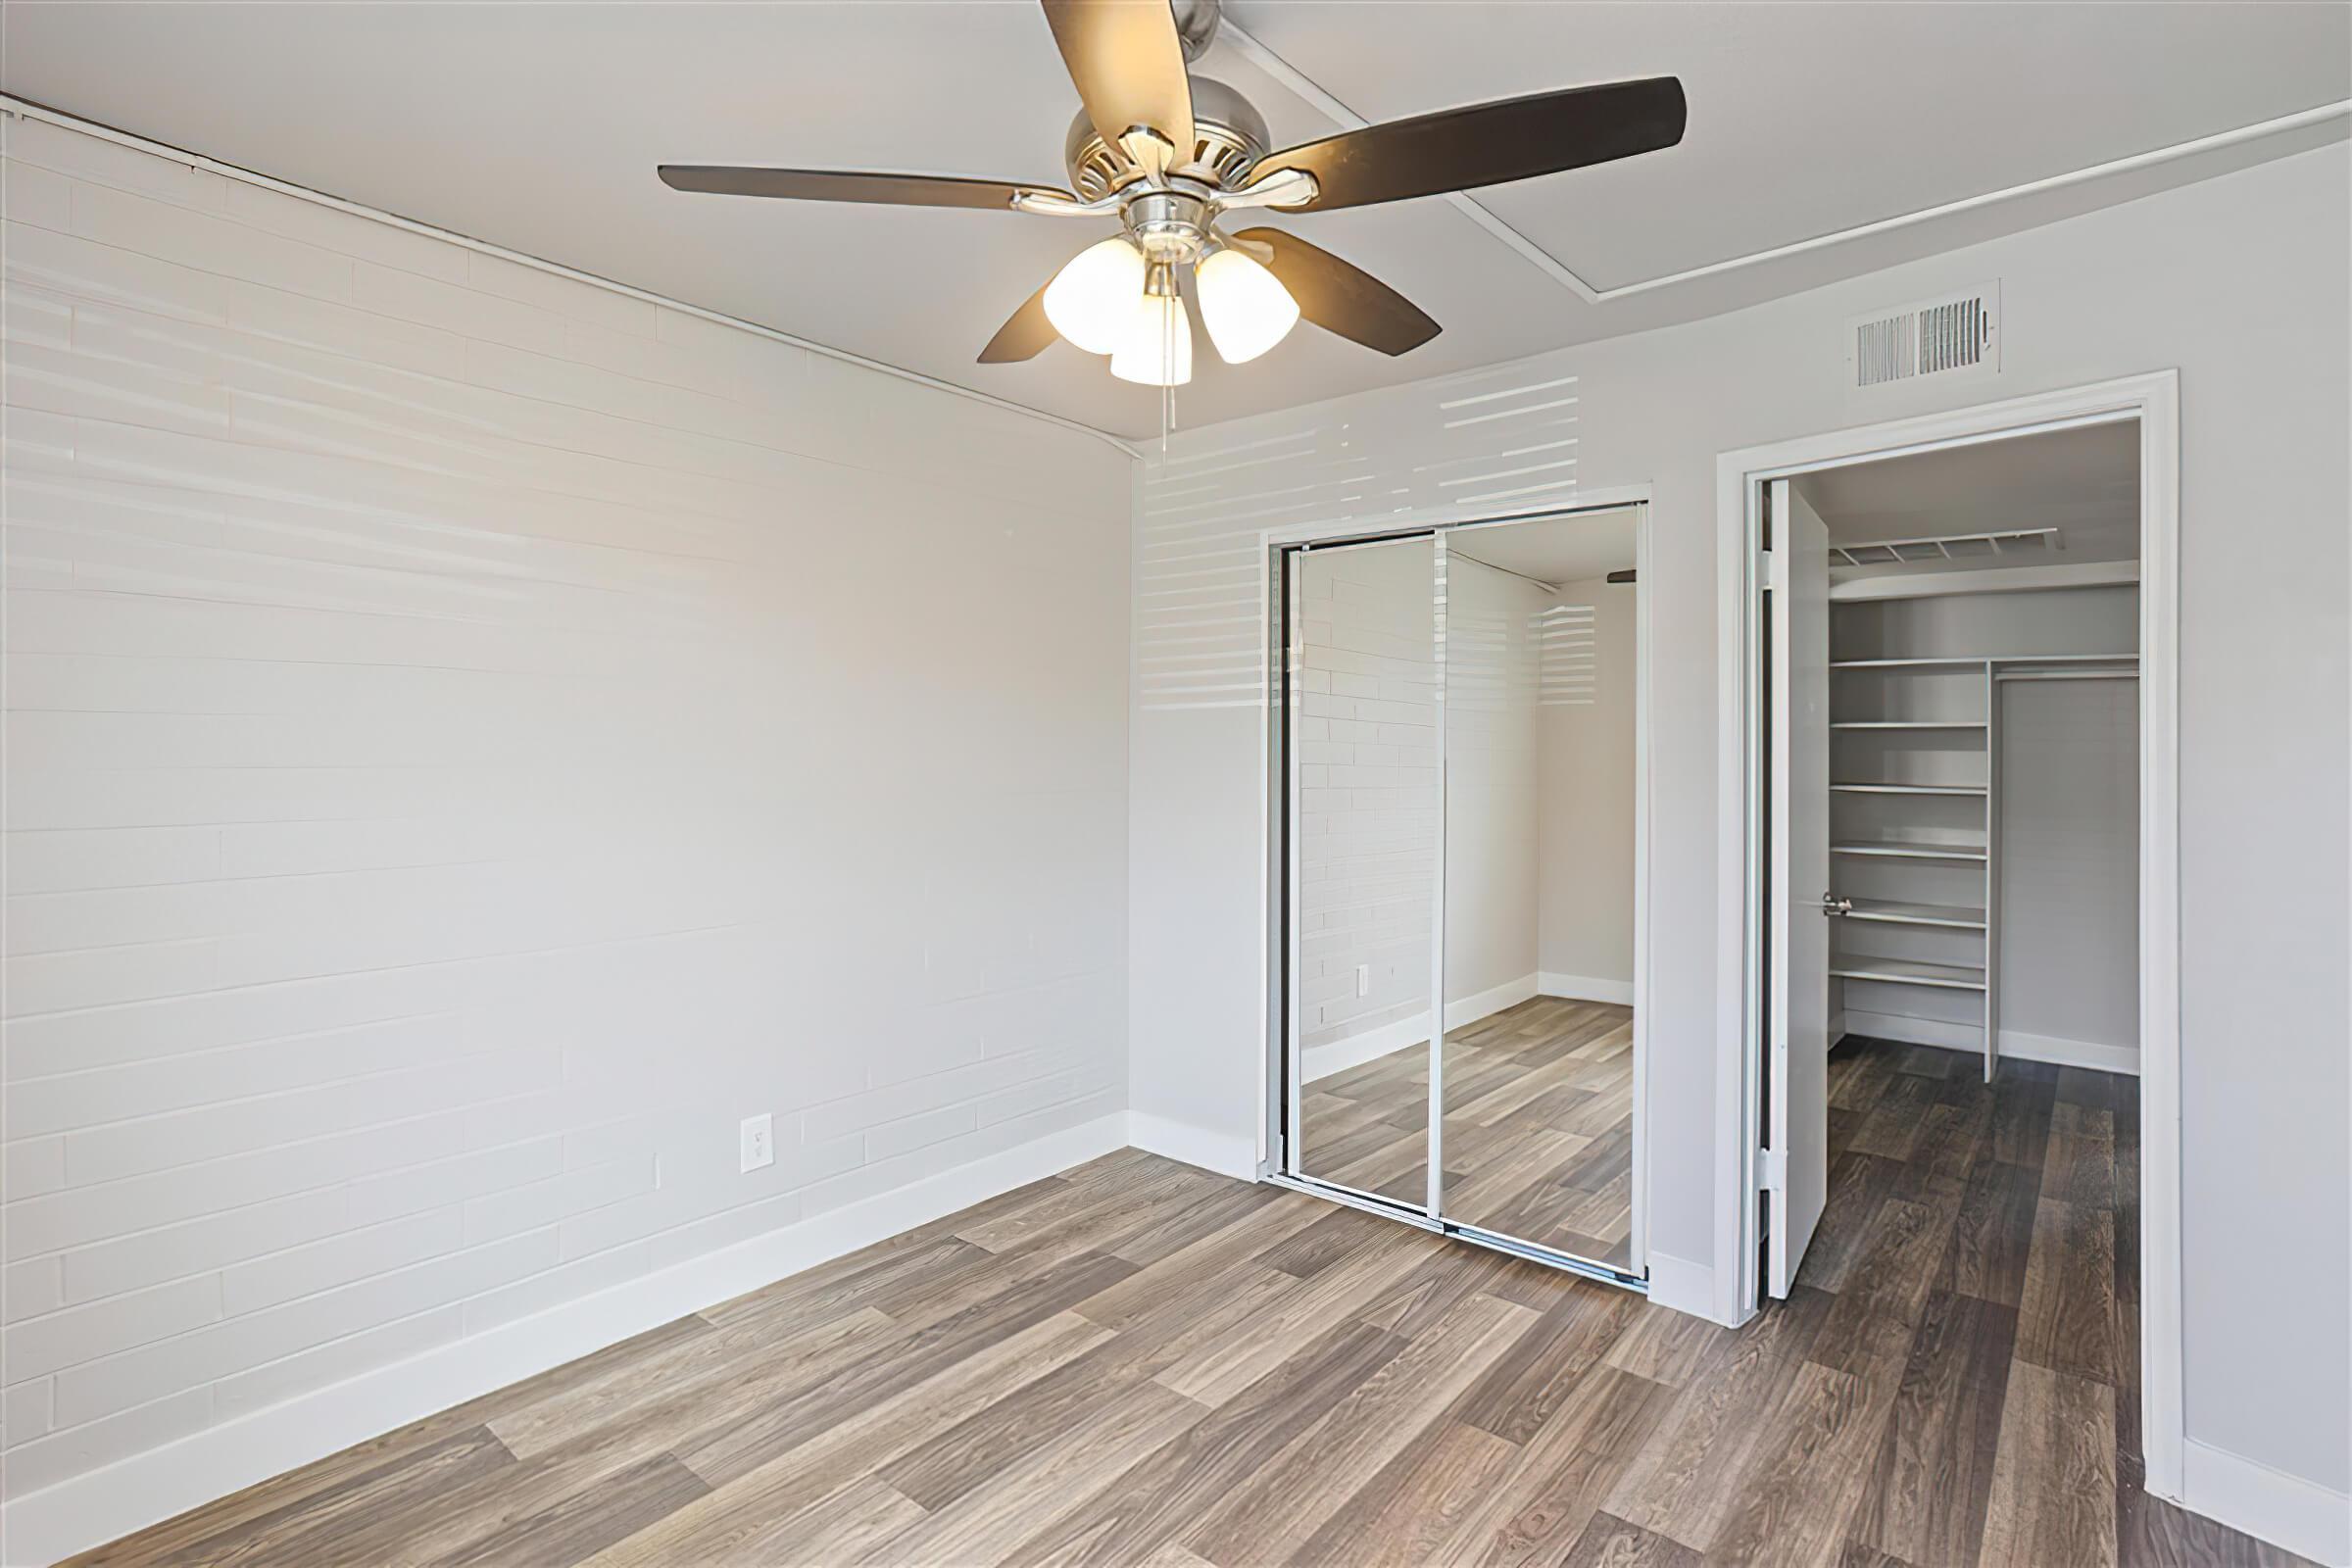 Large empty bedroom with view of a ceiling fan, mirrored closets, and a large walk in closet